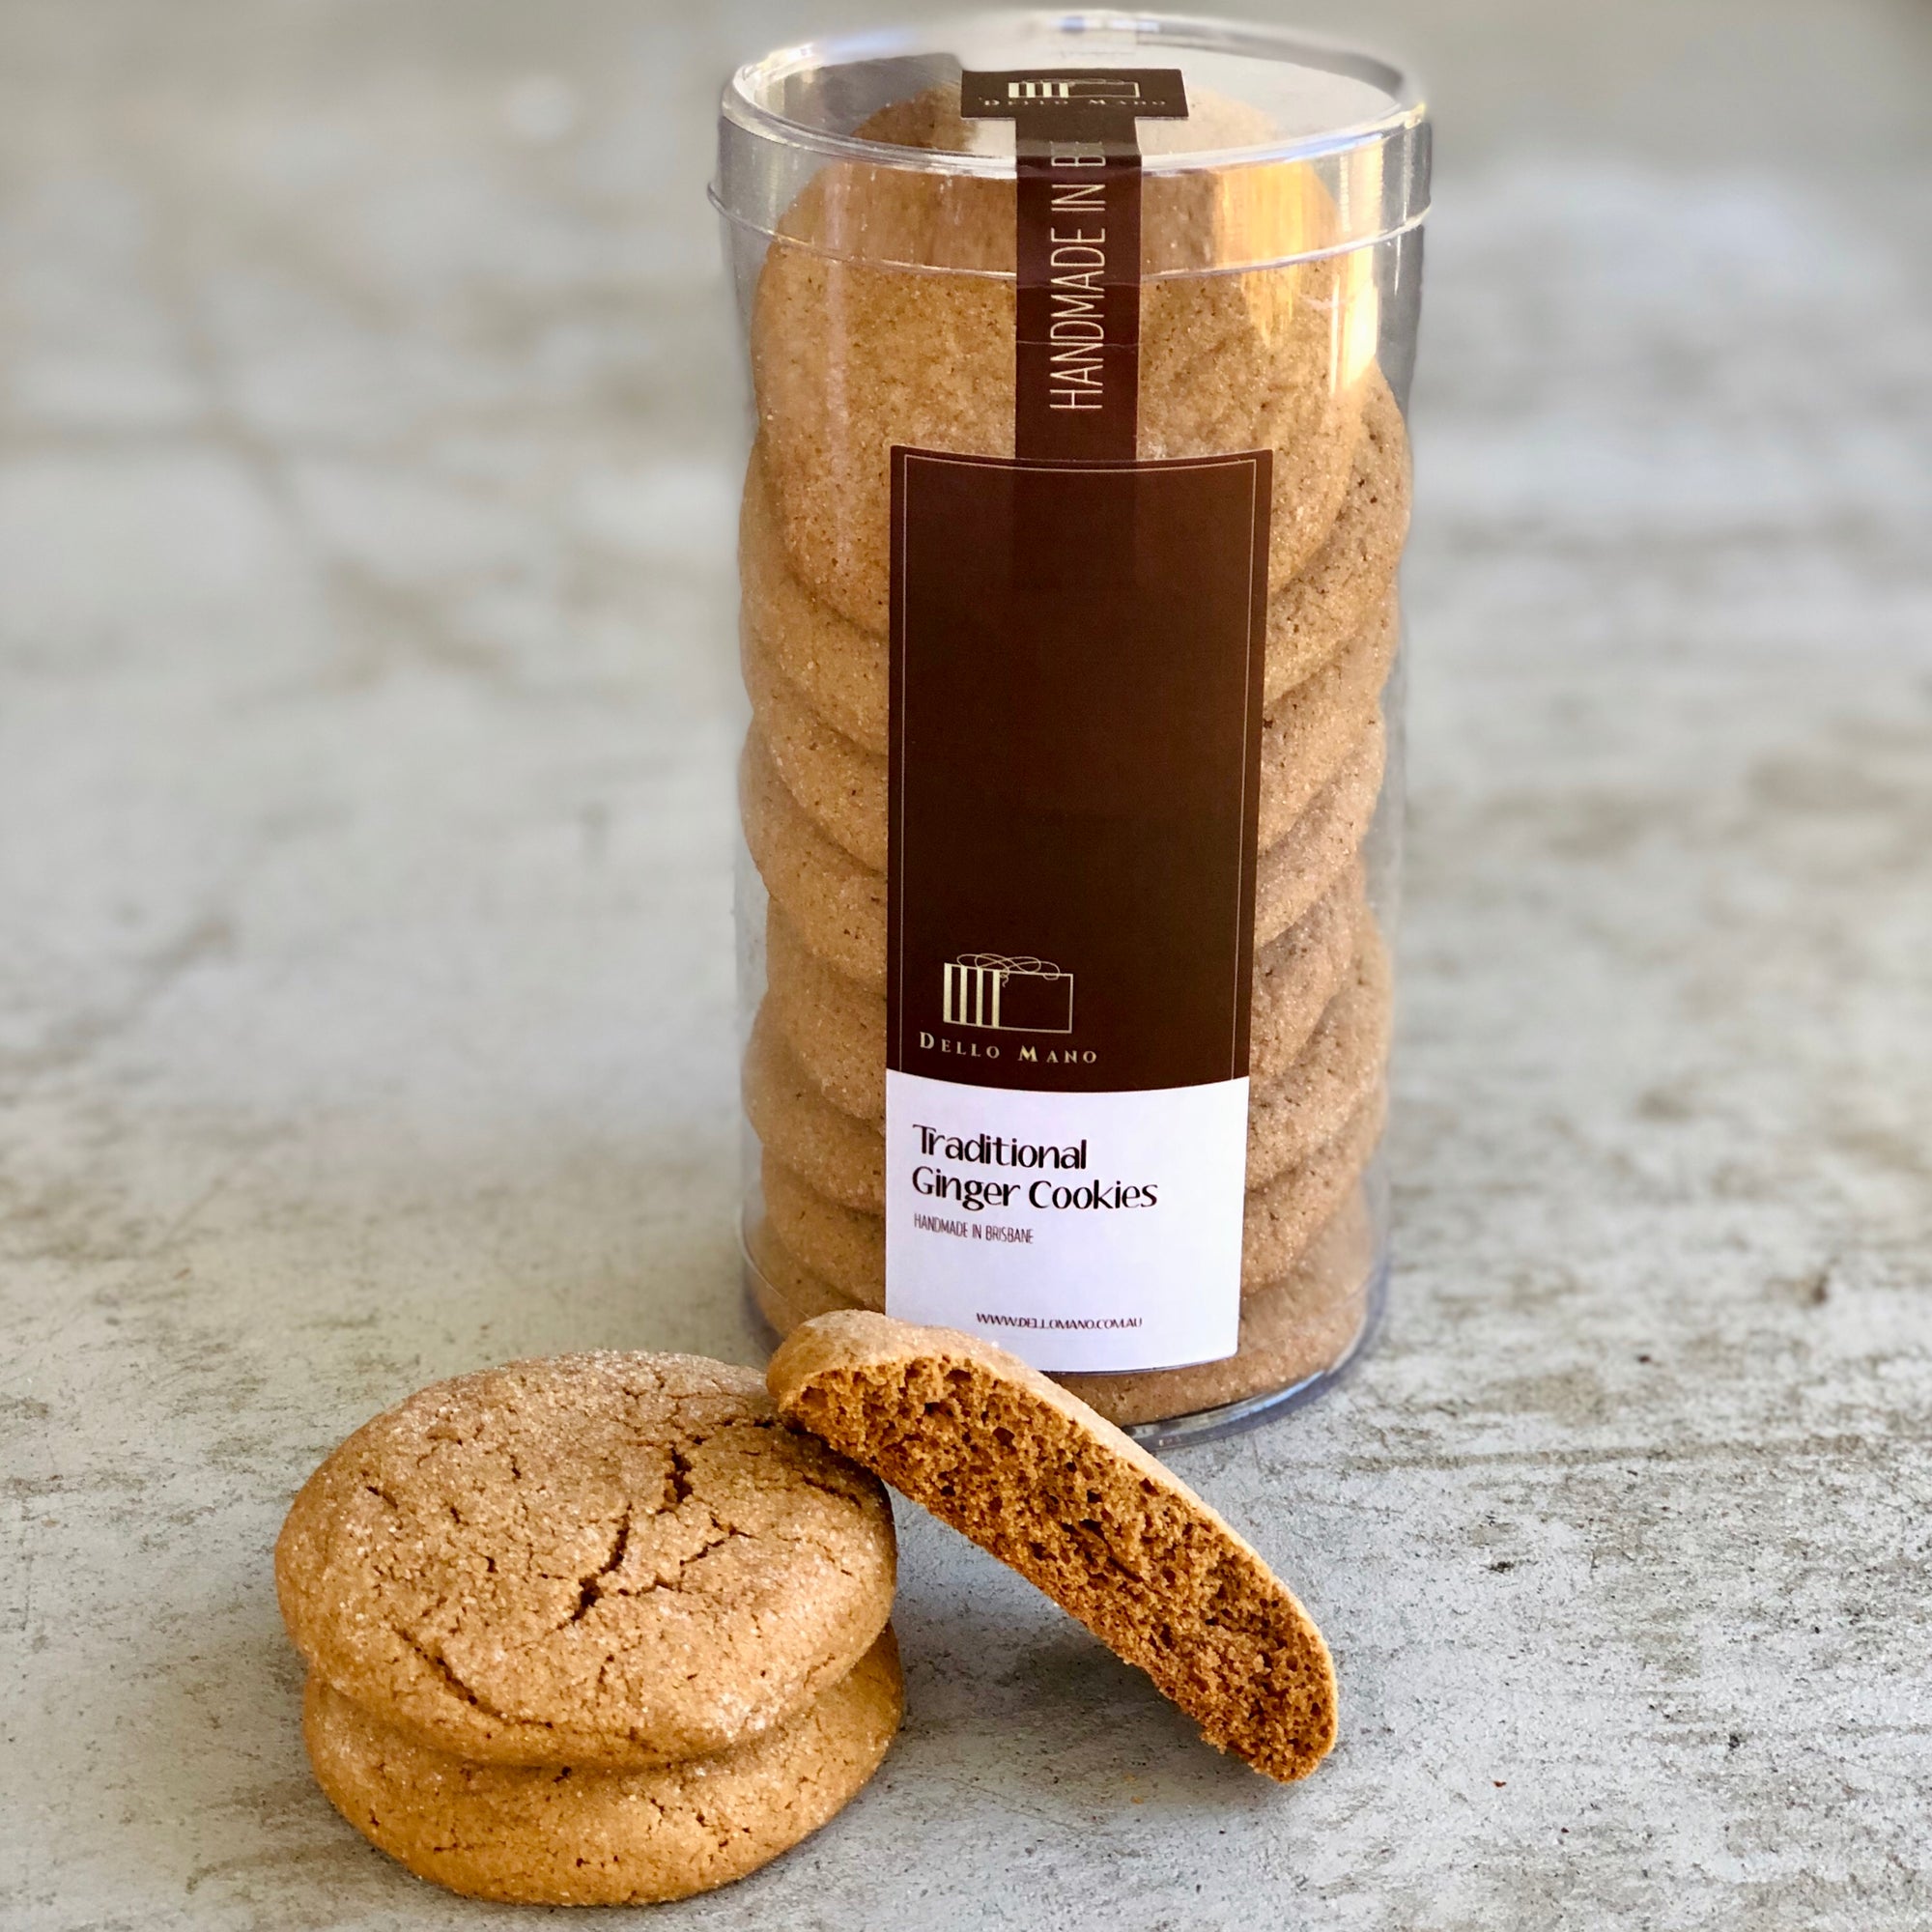 These are our beautiful Traditional Ginger Cookies. We started making these around 2007 and have continuously made them ever since. A delicious real cookie, make with no added preservatives. Pure traditional cookie.